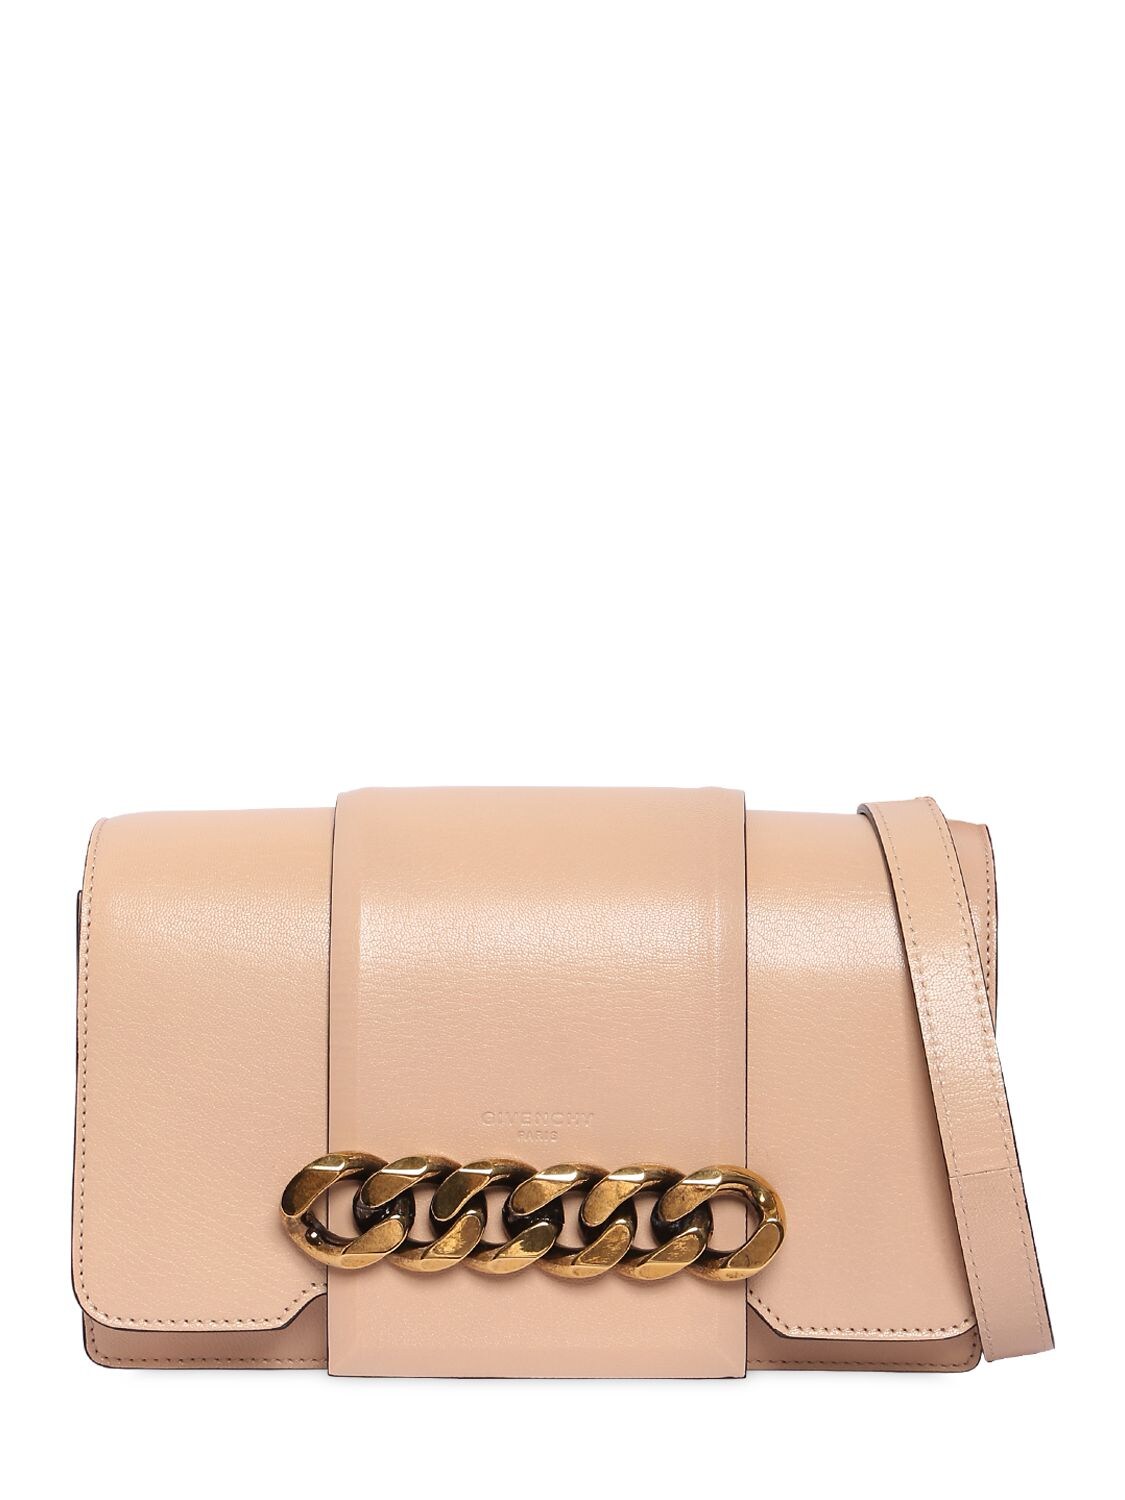 Givenchy Small Infinity Leather Shoulder Bag In Light Pink